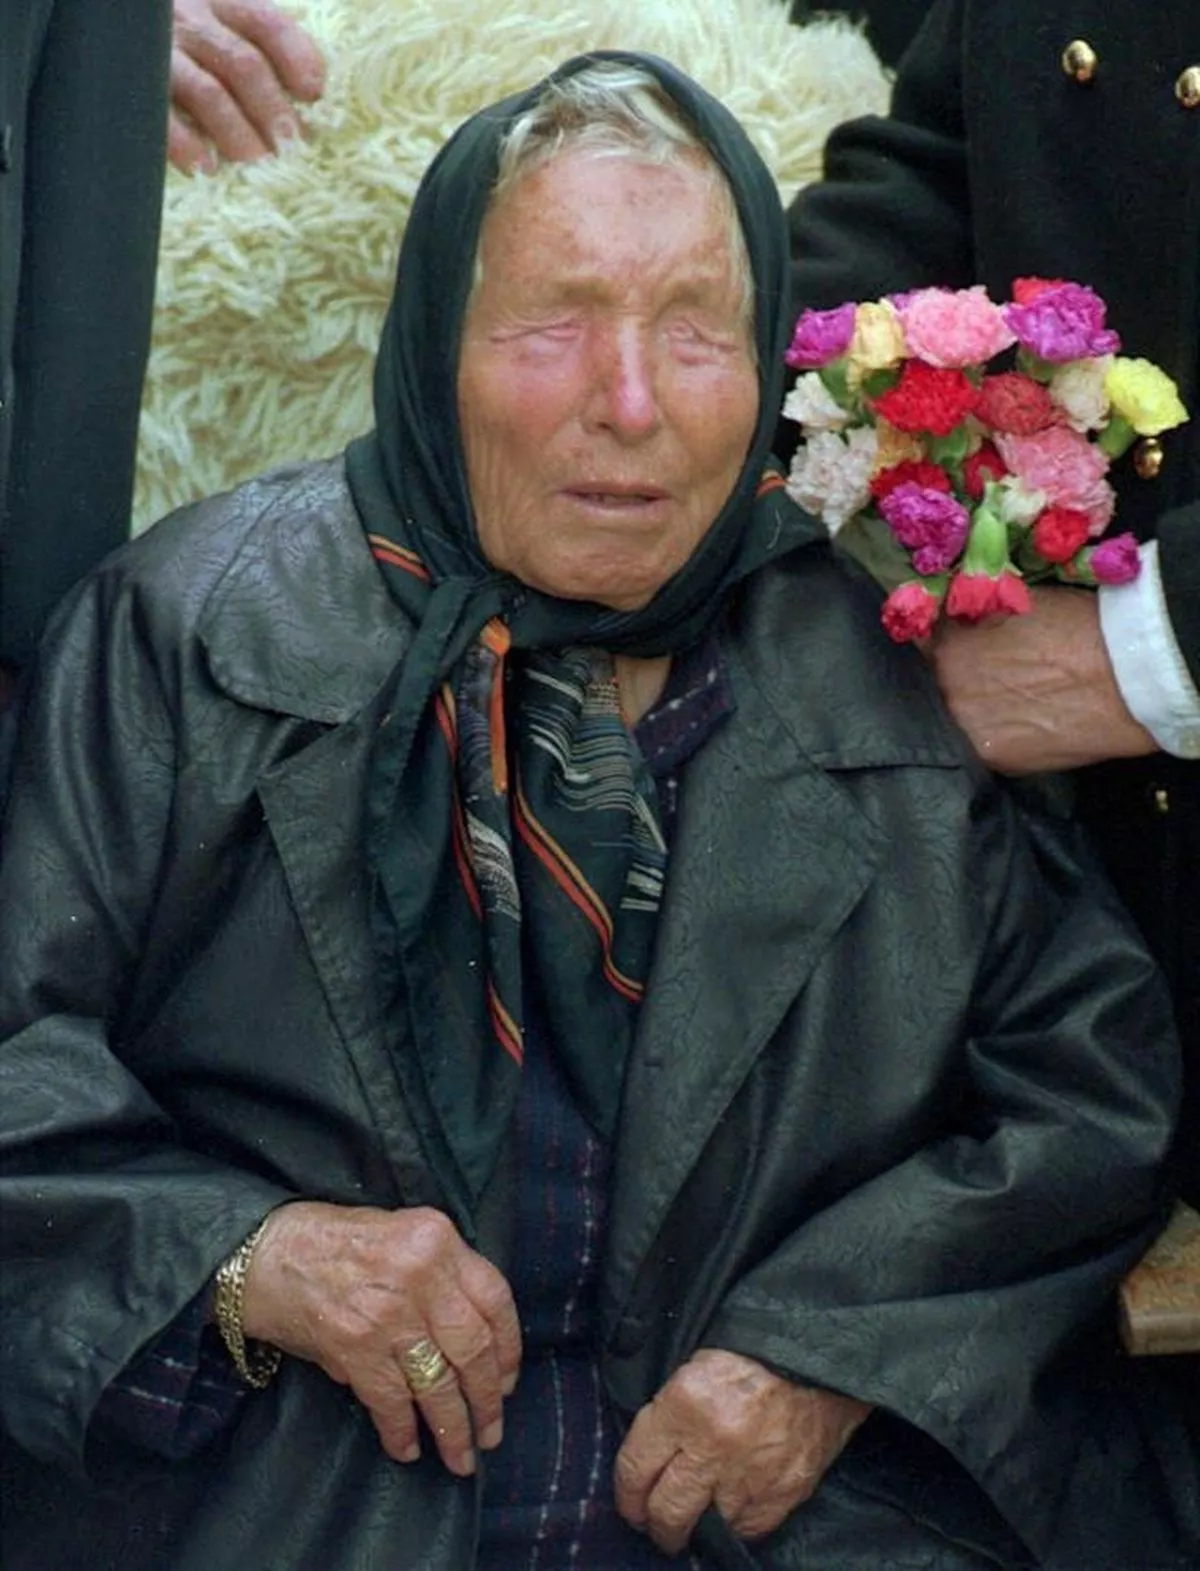 Baba Vanga's chilling 43 year prediction stands as one of her most ominous forecasts (2)